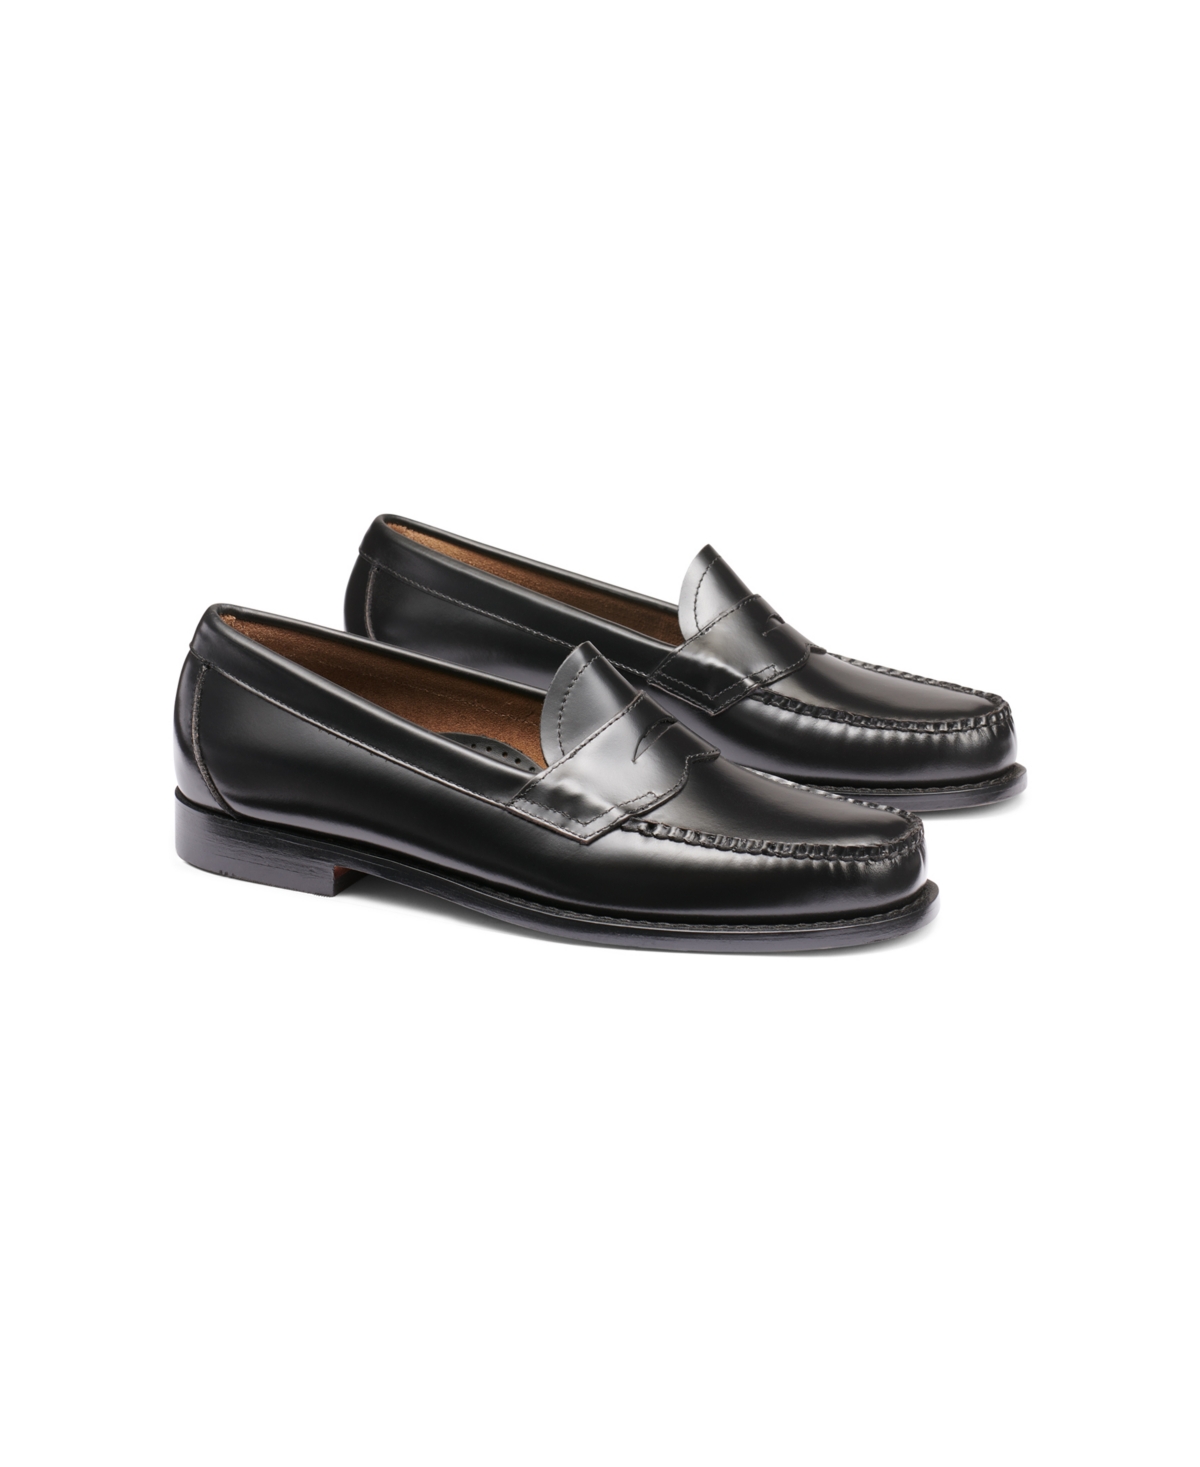 G.h.bass Men's Logan Weejuns Penny Loafers - Black